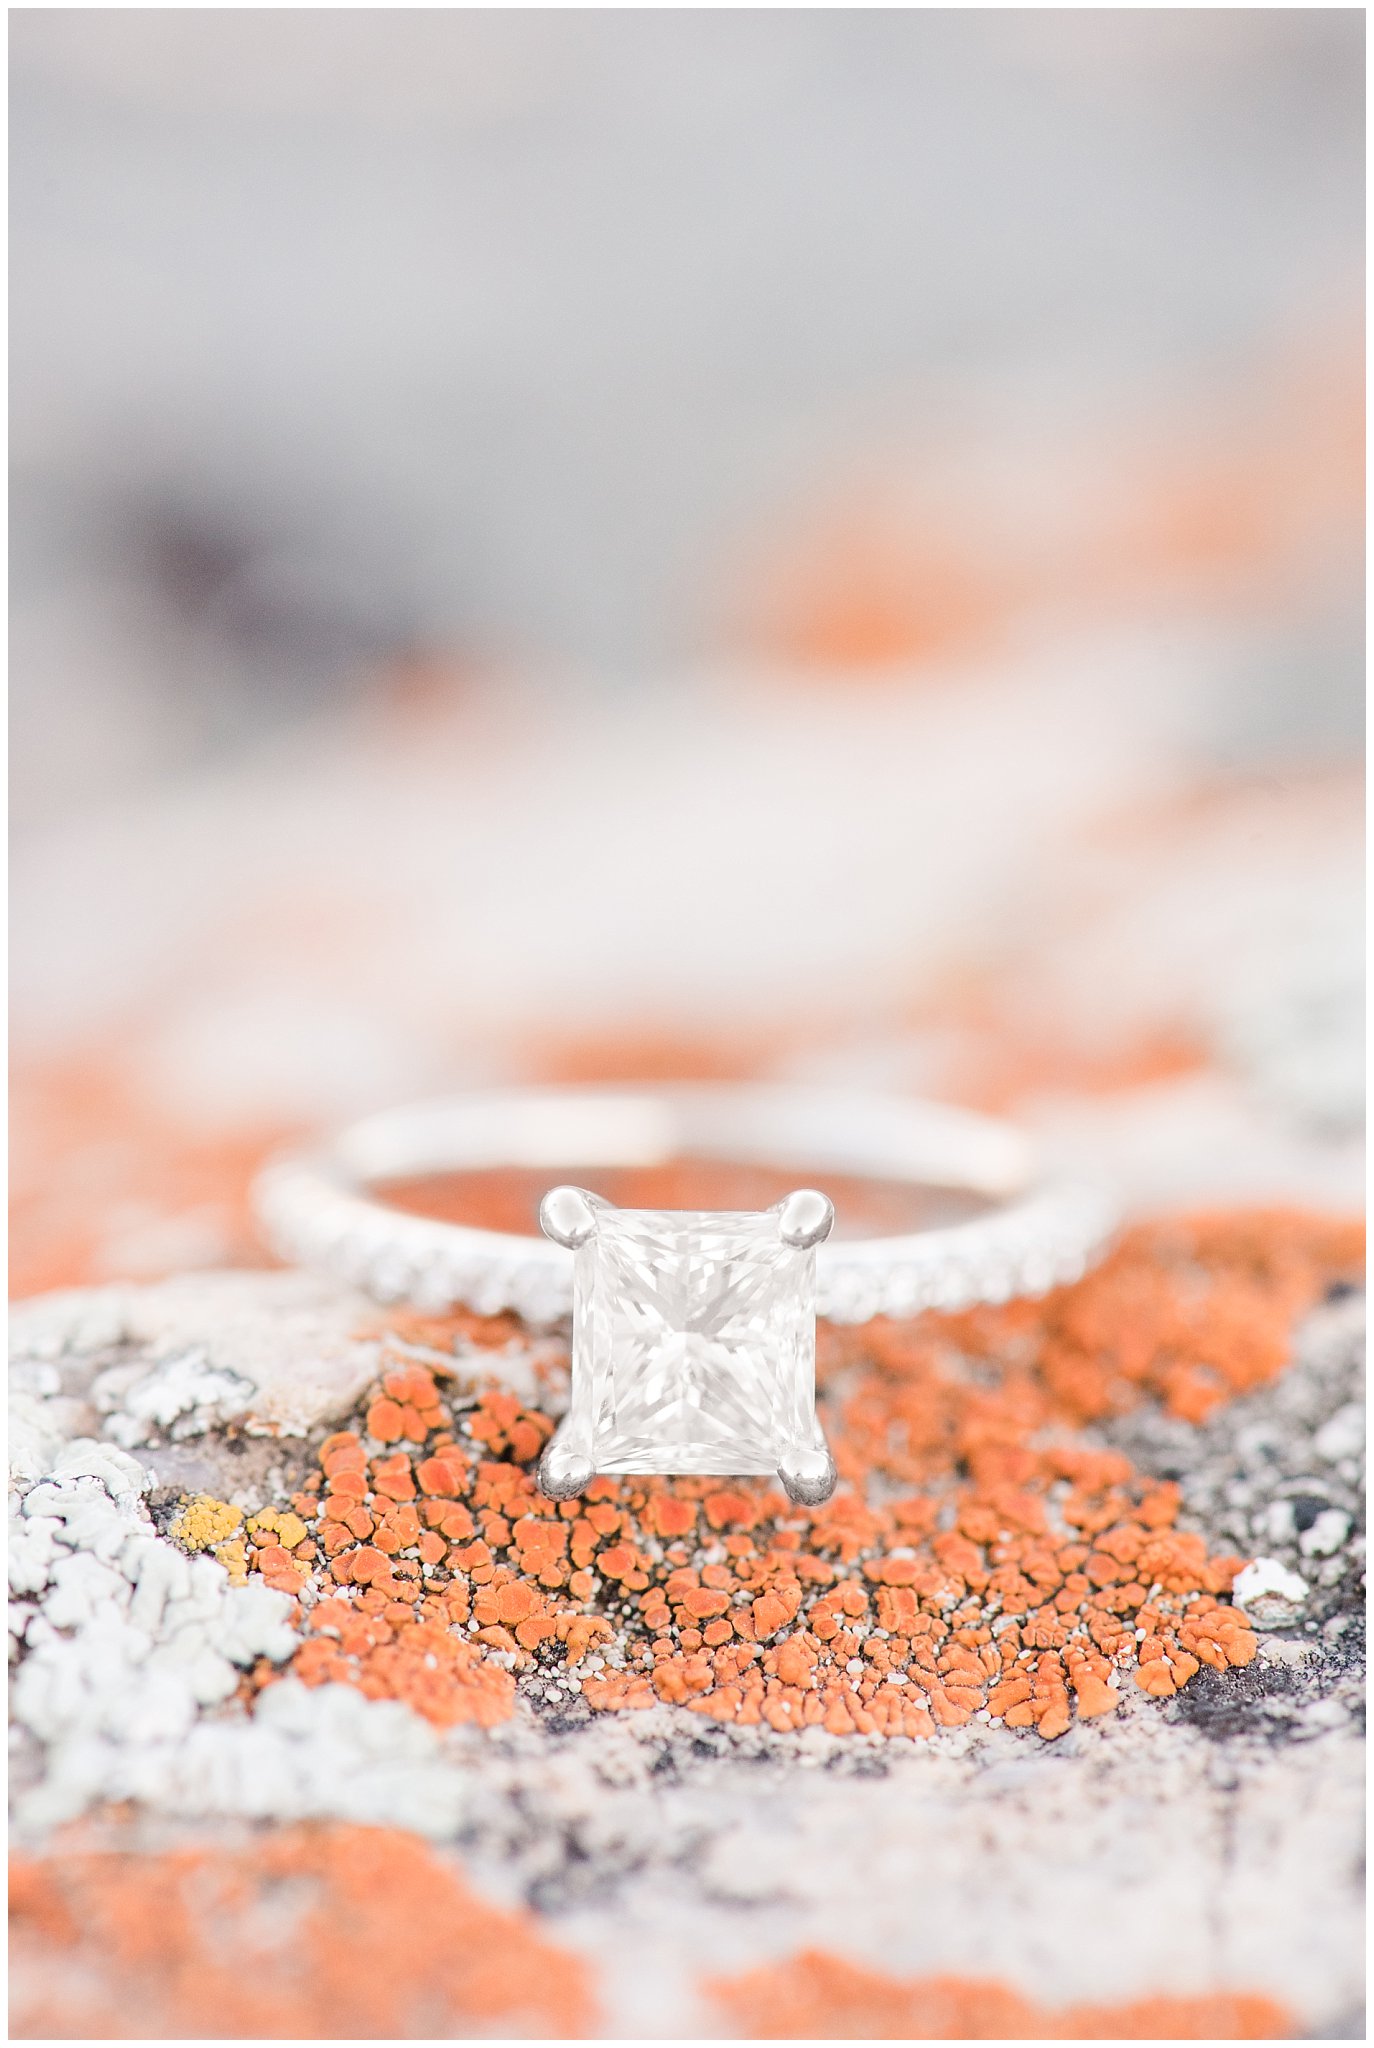 Engagement ring in desert landscape for engagements | Antelope Island Spring Engagement | Jessie and Dallin Photography